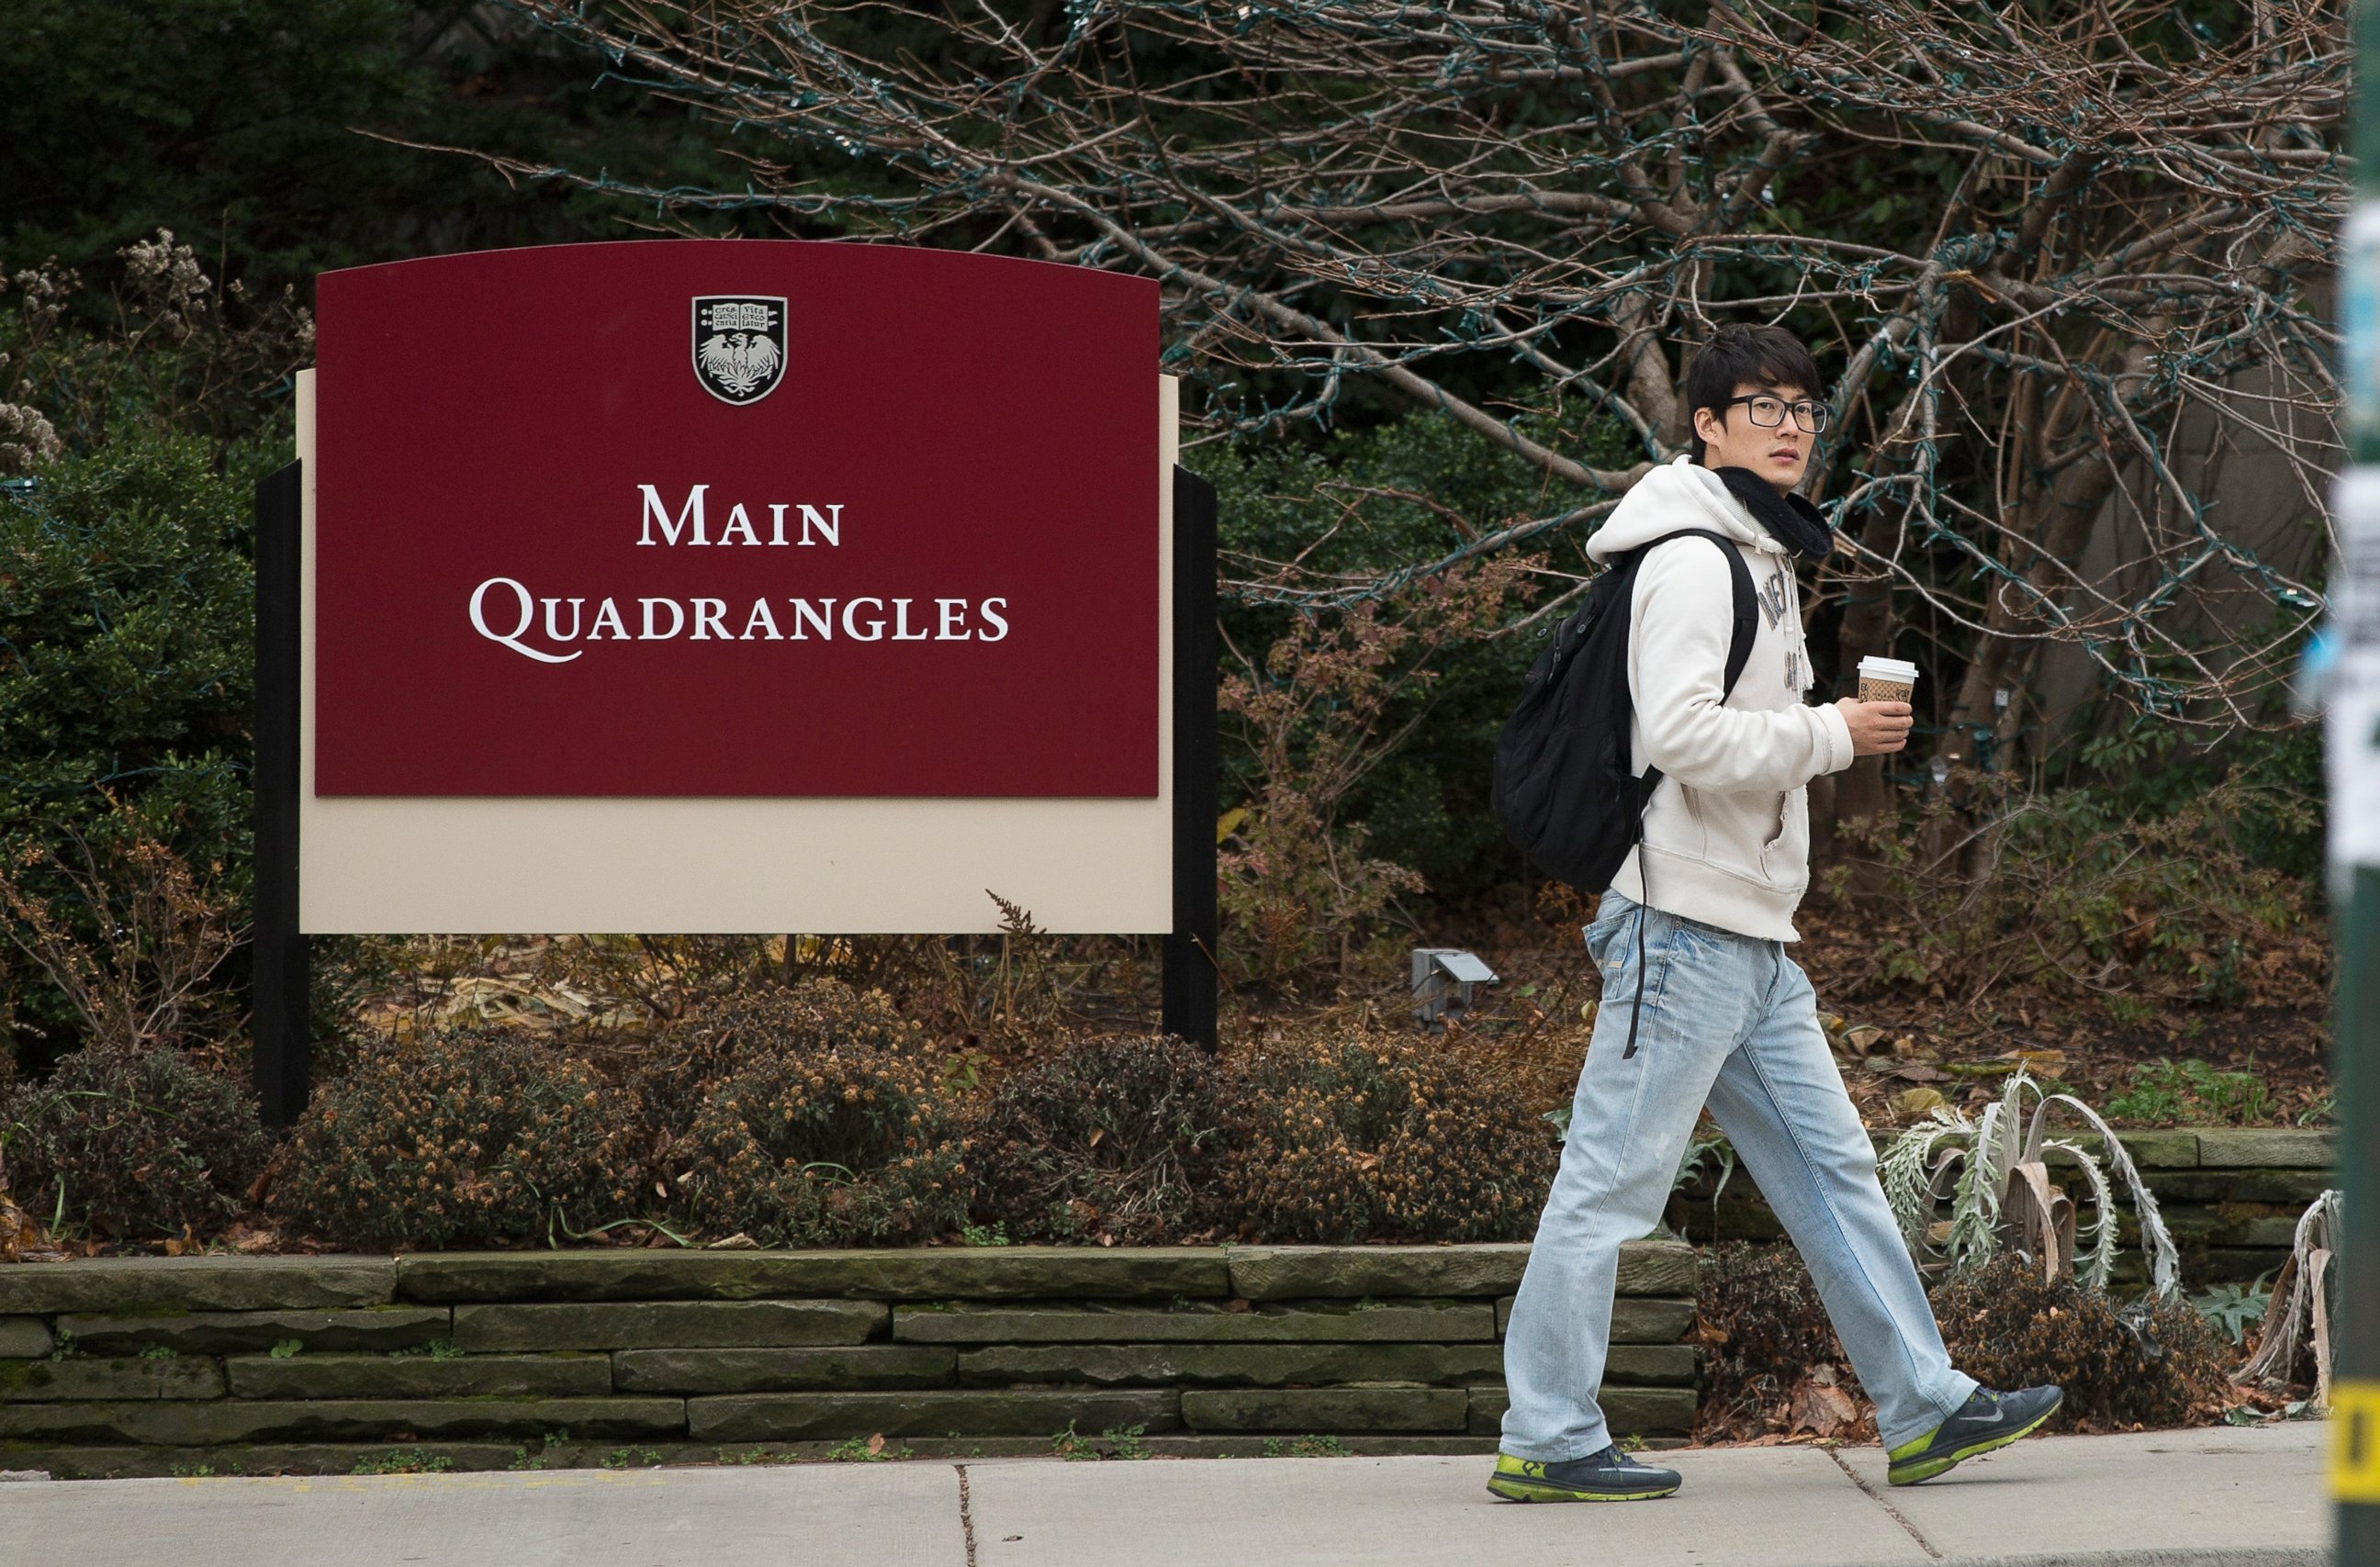 PHOTO: Pedestrians walk past an entrance to the main quad on the Hyde Park Campus of the University of Chicago on Nov. 30, 2015 in Chicago.